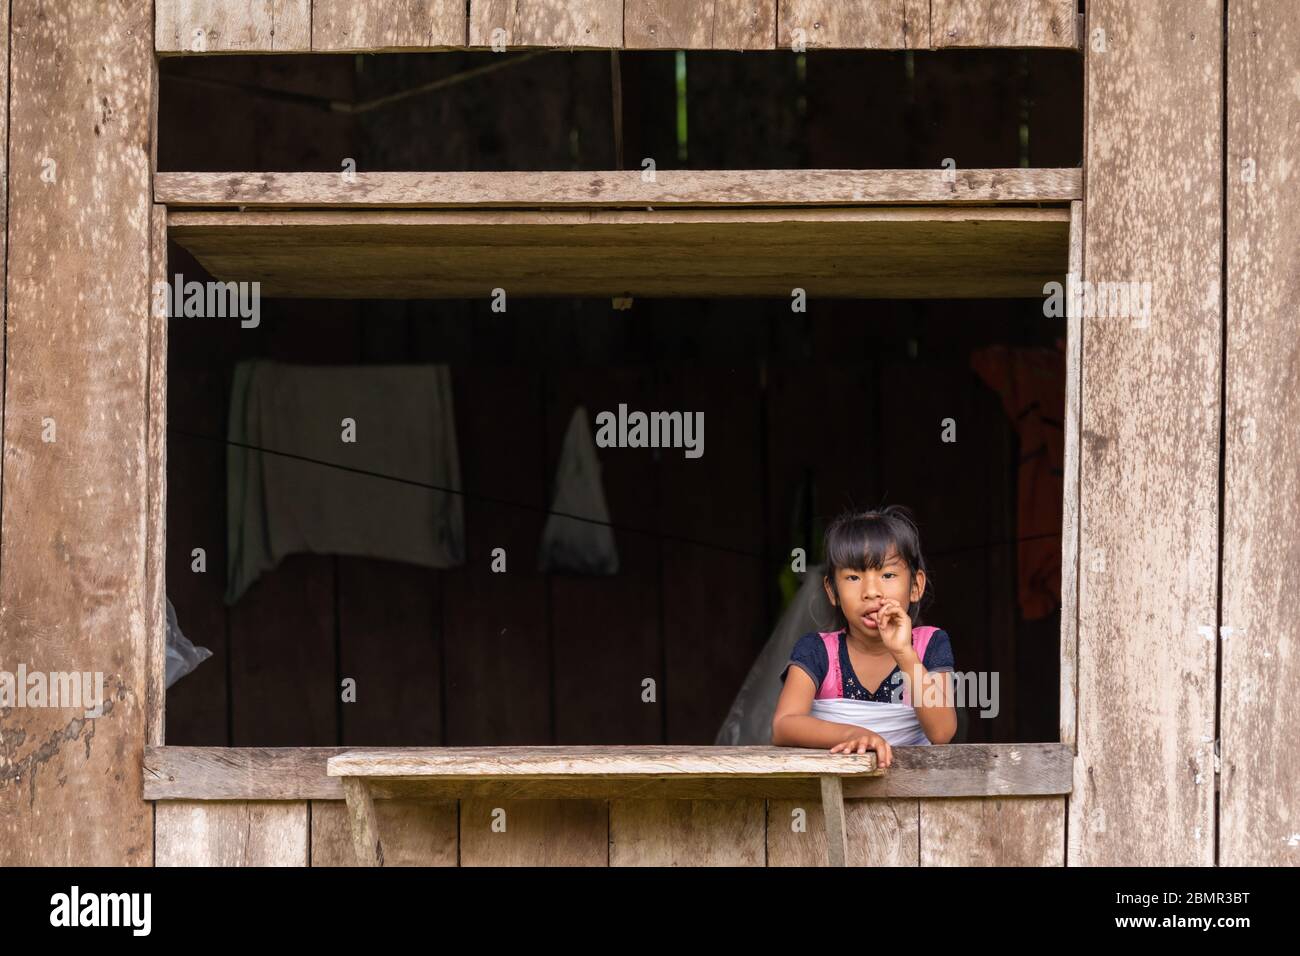 Riberenos child watches from a window in Peruvian Amazon Stock Photo